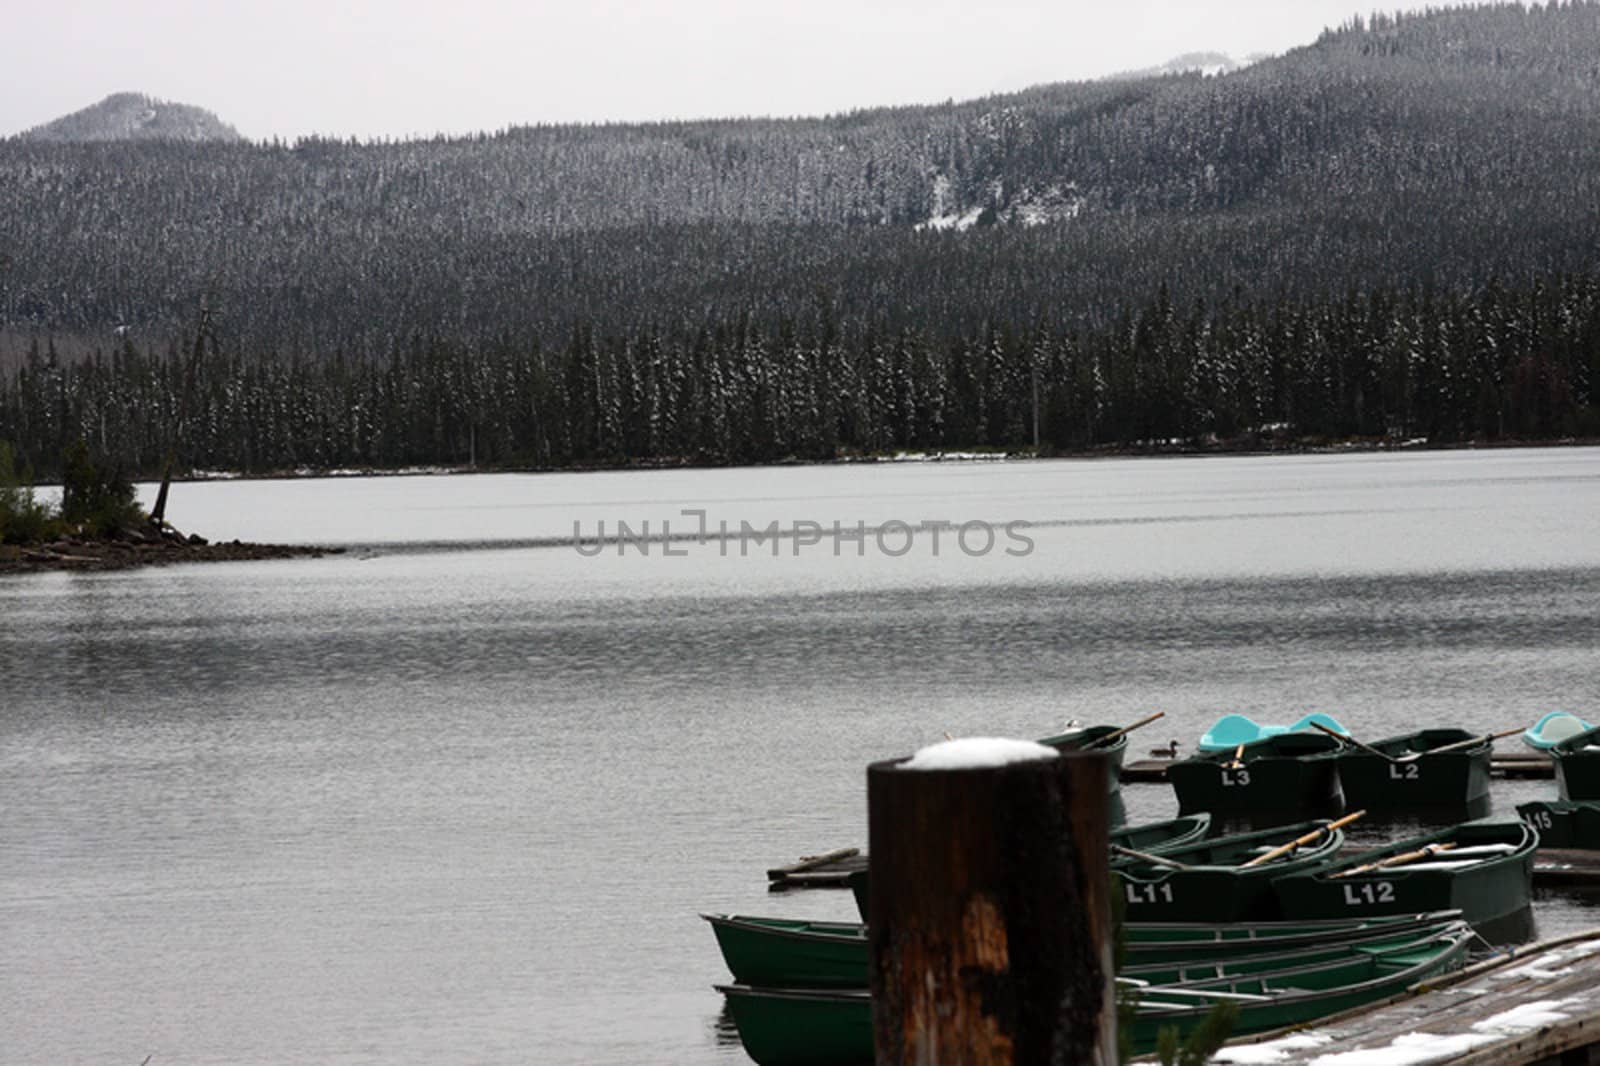 Winter at Olollie Lake, OR.  Photo taken in the Mount Hood National Forest, OR.